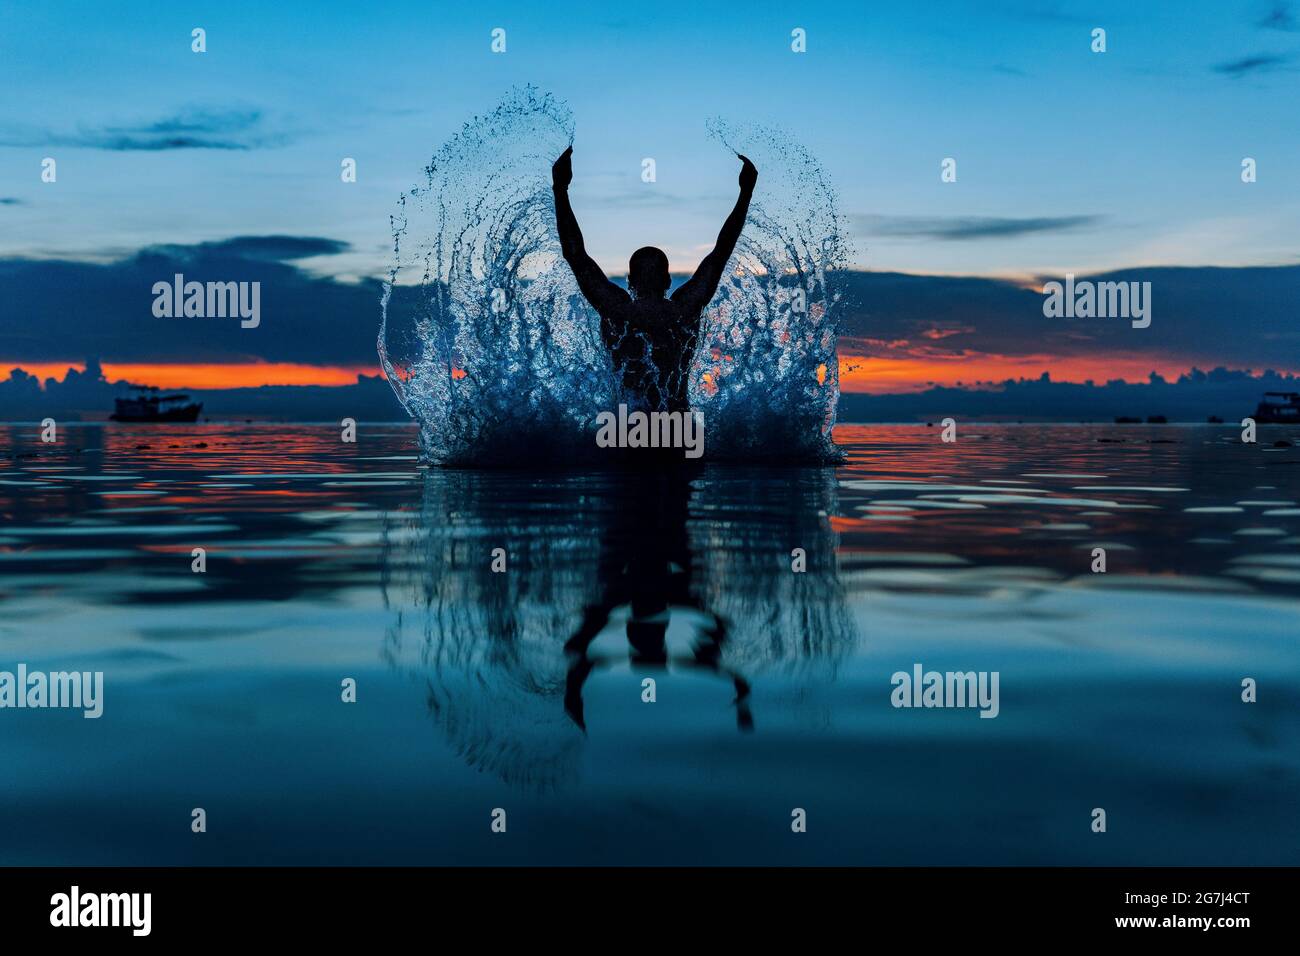 Angel Jumping of Water Souvenir of a Sunset Stock Photo